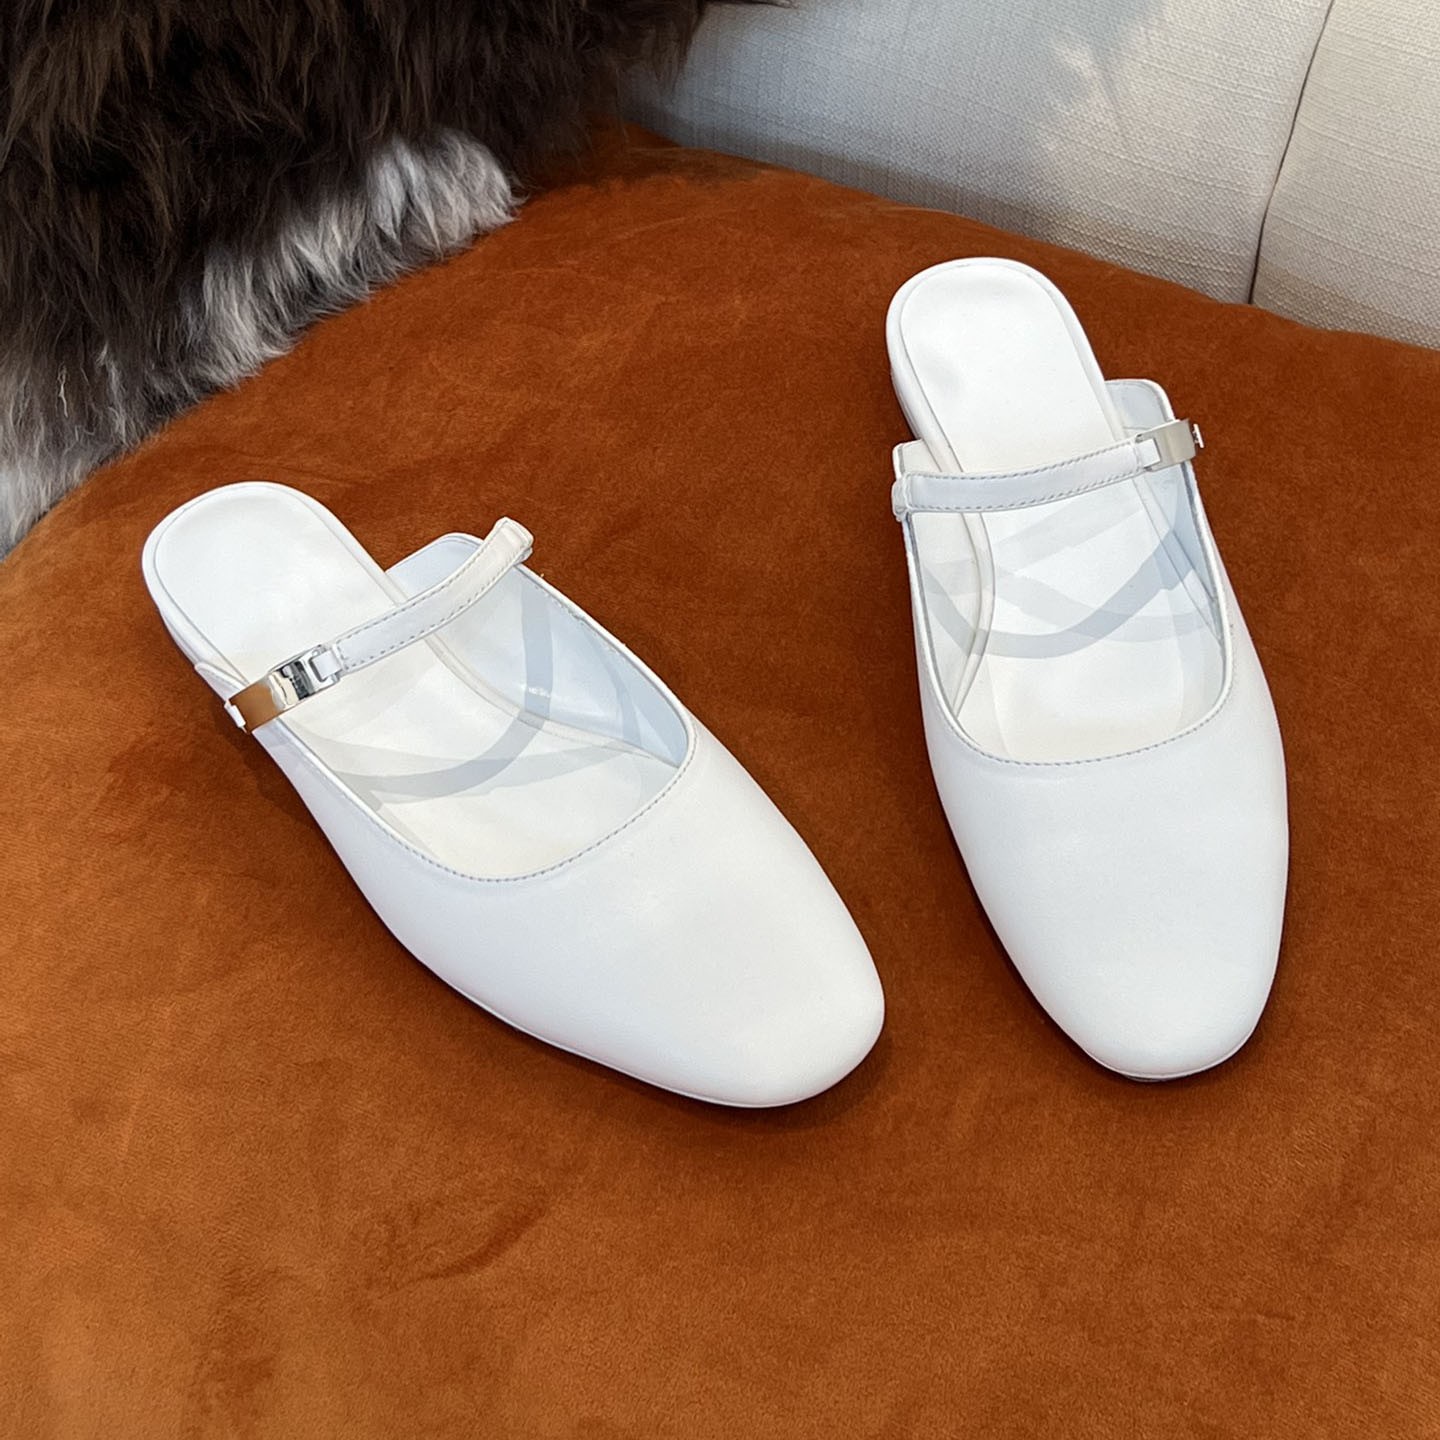 Spring Summer Slippers Round Toe Women Slippers Concise Genuine Leather Metal Decor Women Shoes 2022 New Ladylike Woman Shoes